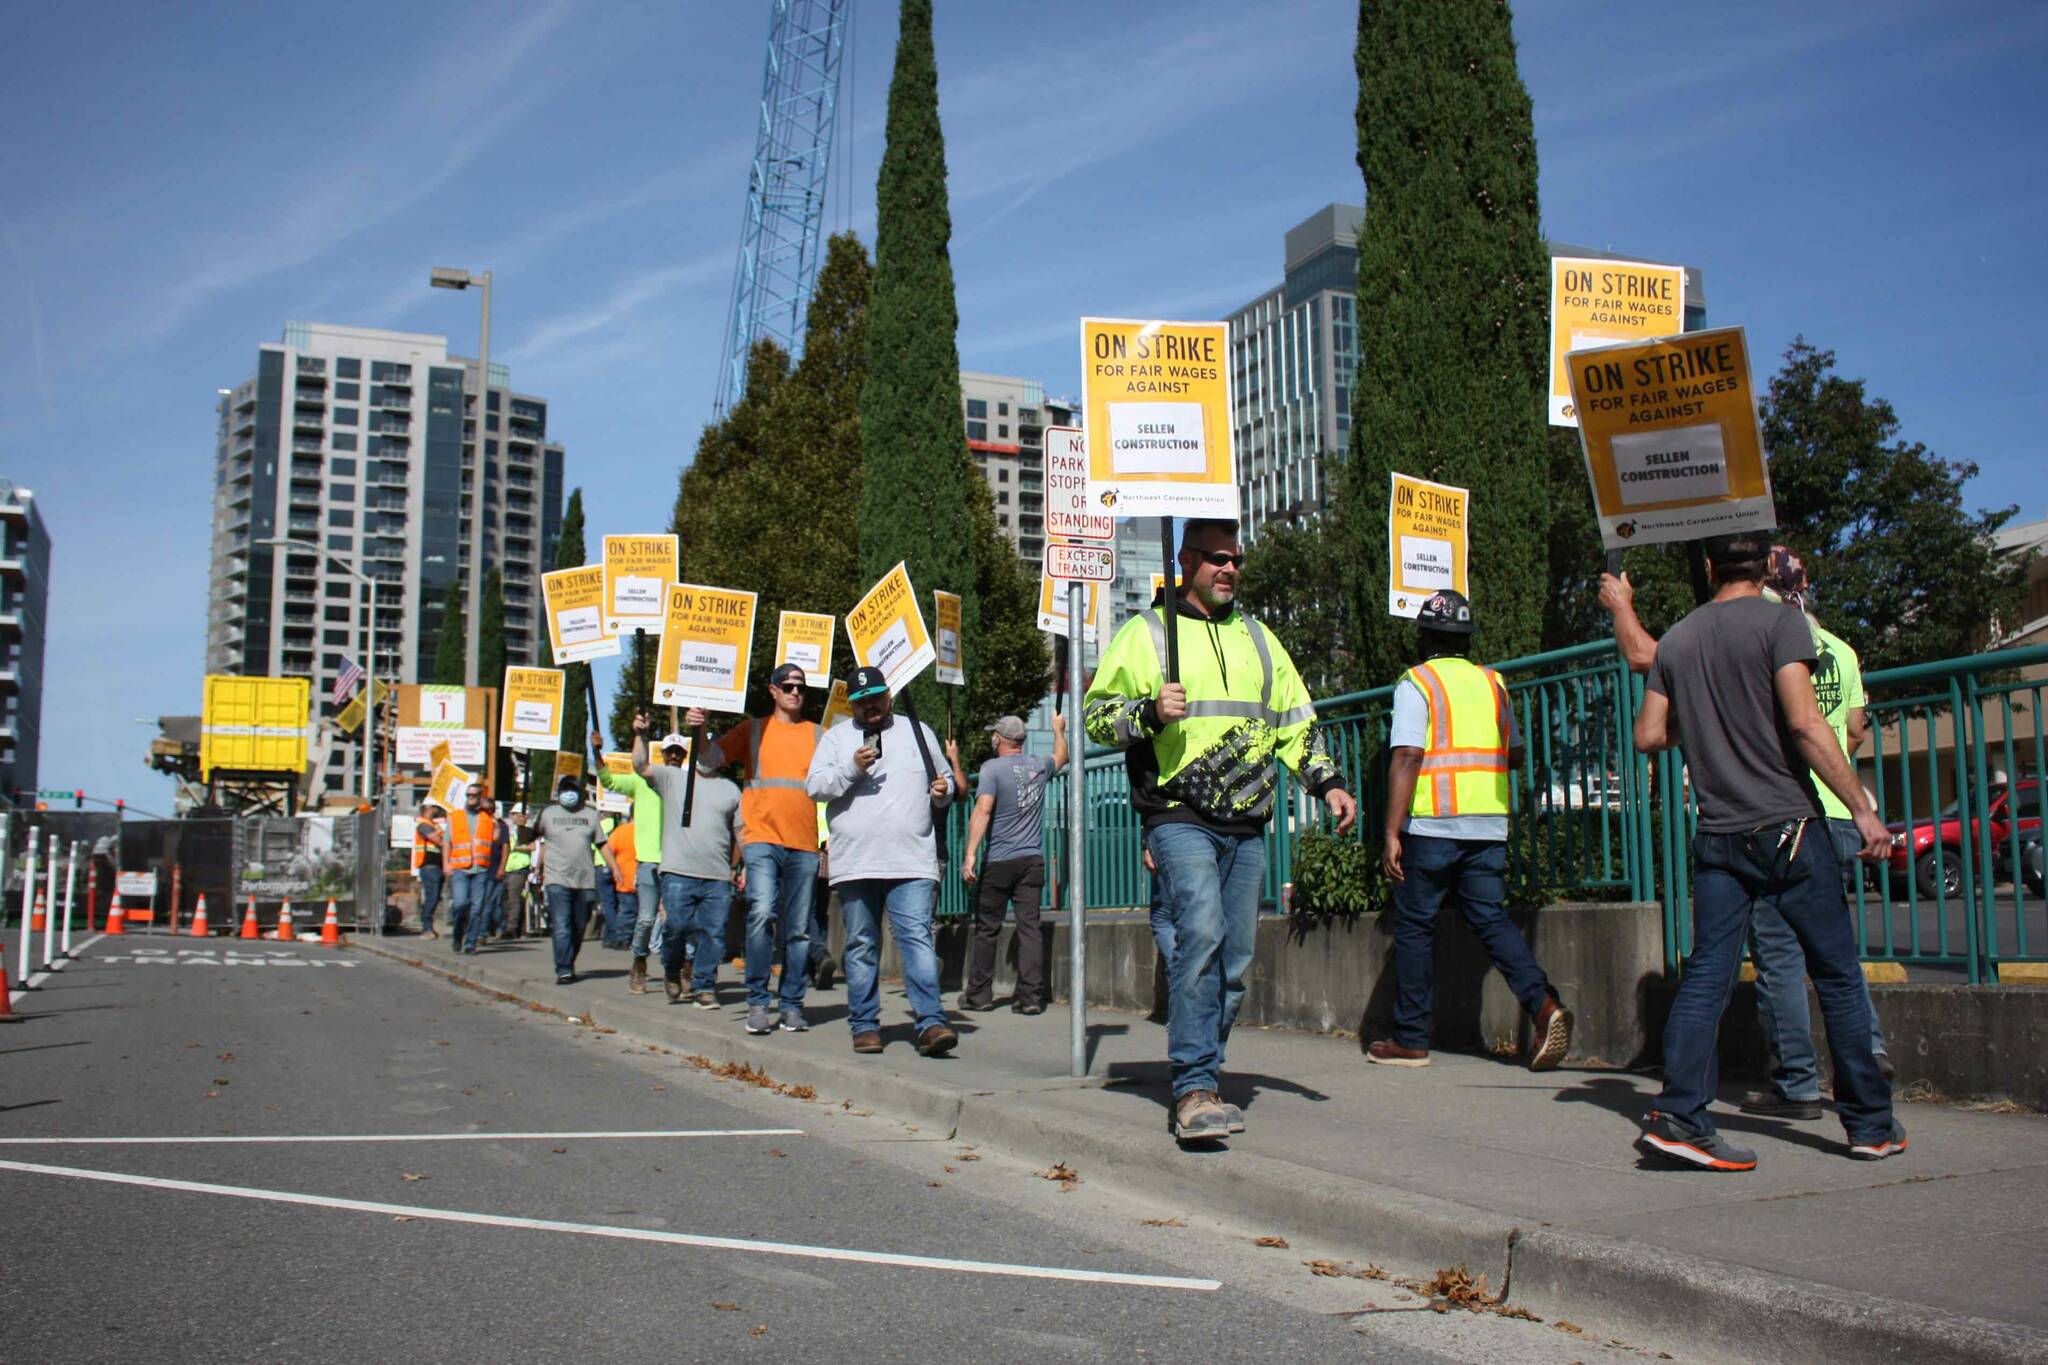 NW Carpenters Union members strike in front of downtown Bellevue construction site (photo by Cameron Sheppard)